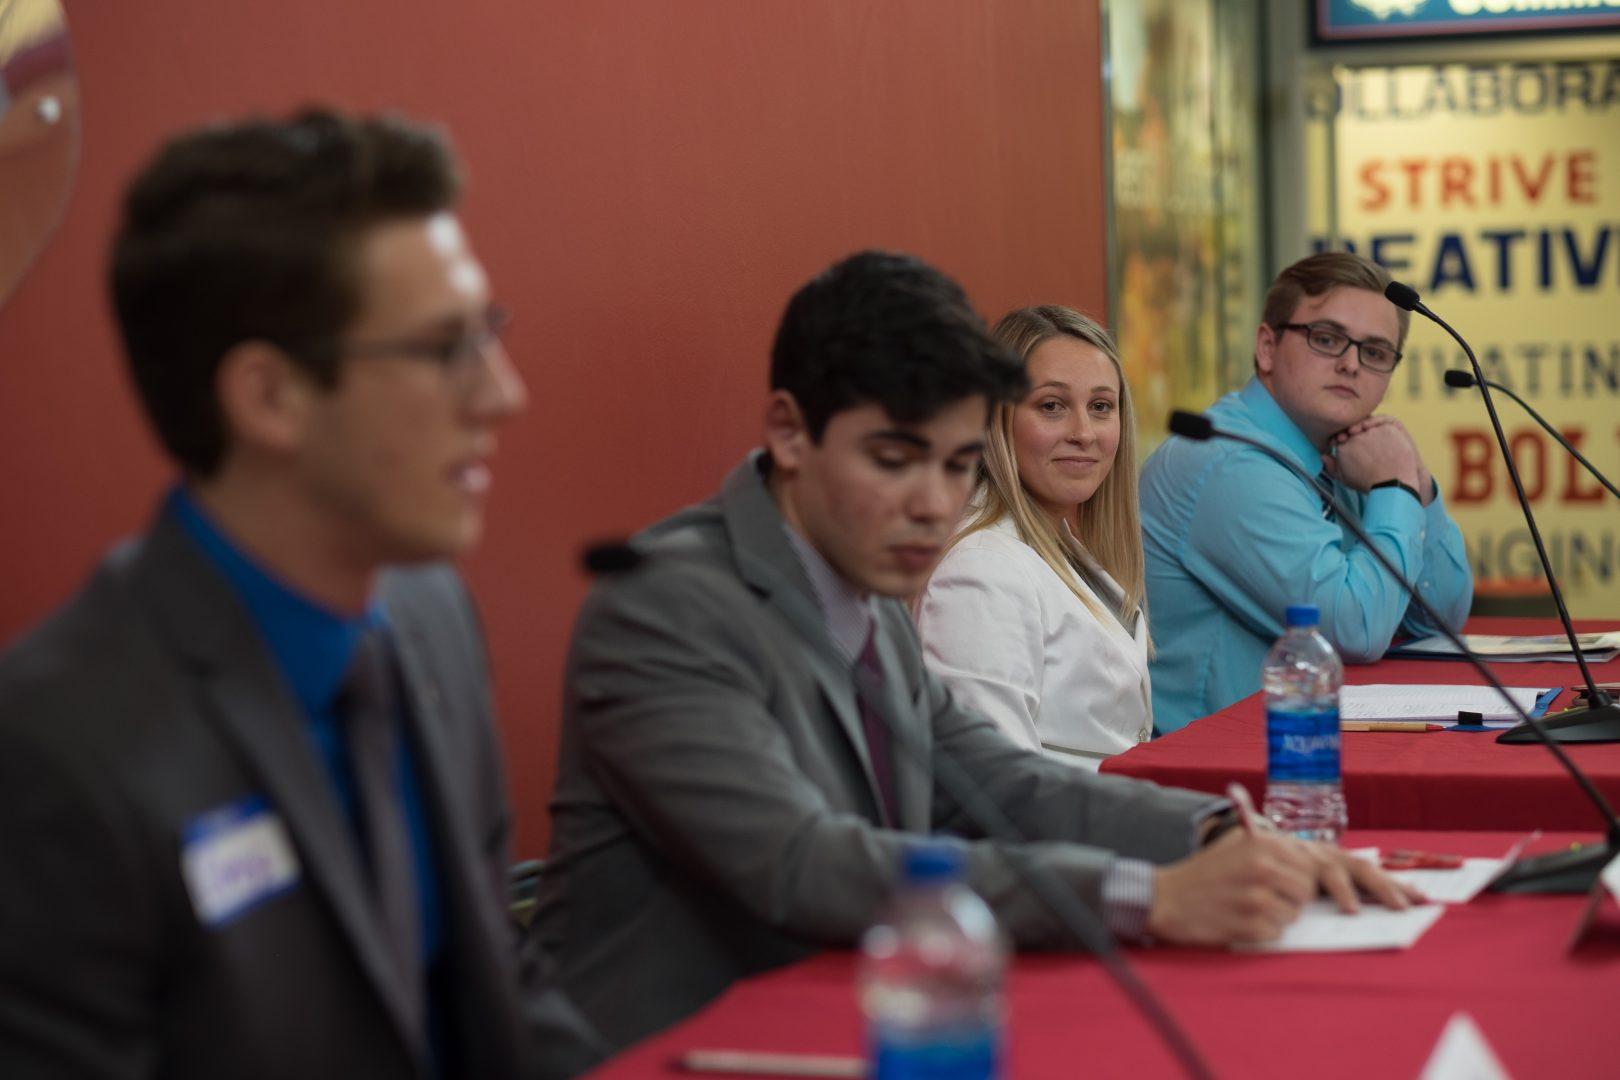 The ASI presidential candidates Corey Miracle, Sebastian Wenthe, Demi Wack and Carter Pope II during the ASI Presidential Debate in the USU on March 16, 2018. (Ram Reyes/The Collegian)